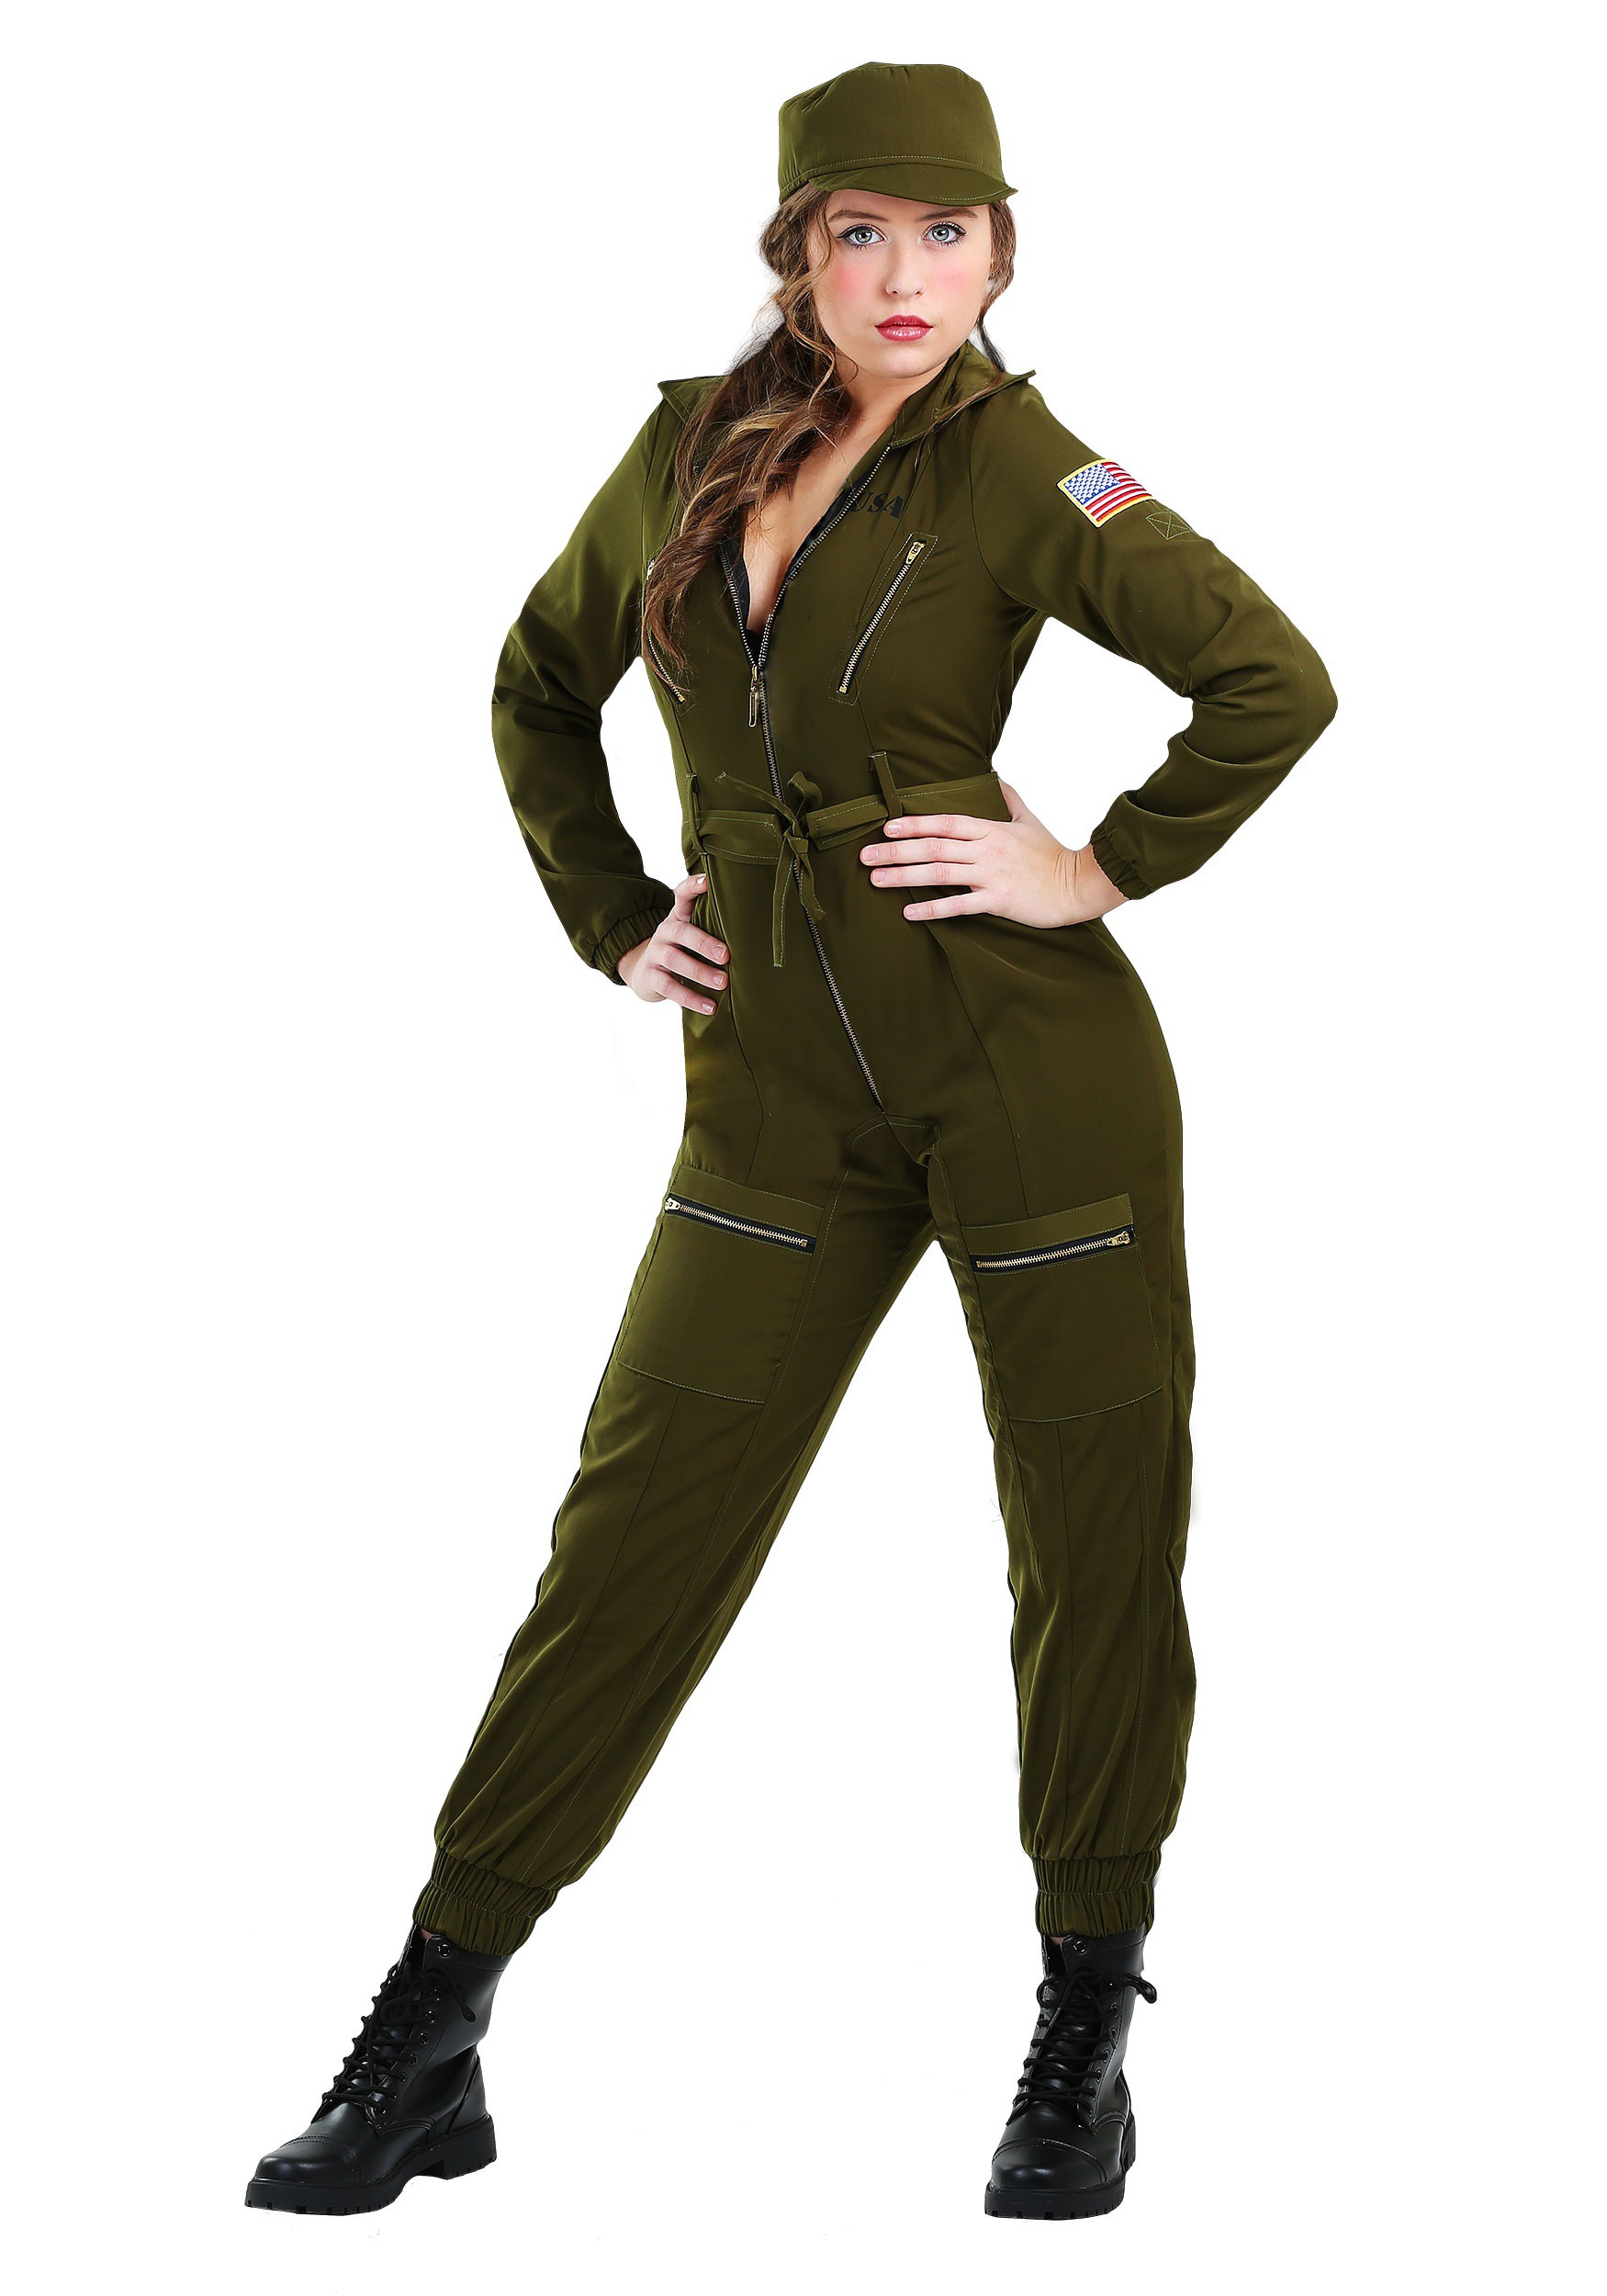 Photos - Fancy Dress FUN Costumes Army Flightsuit Women's Costume | Army Costumes for Women Gre